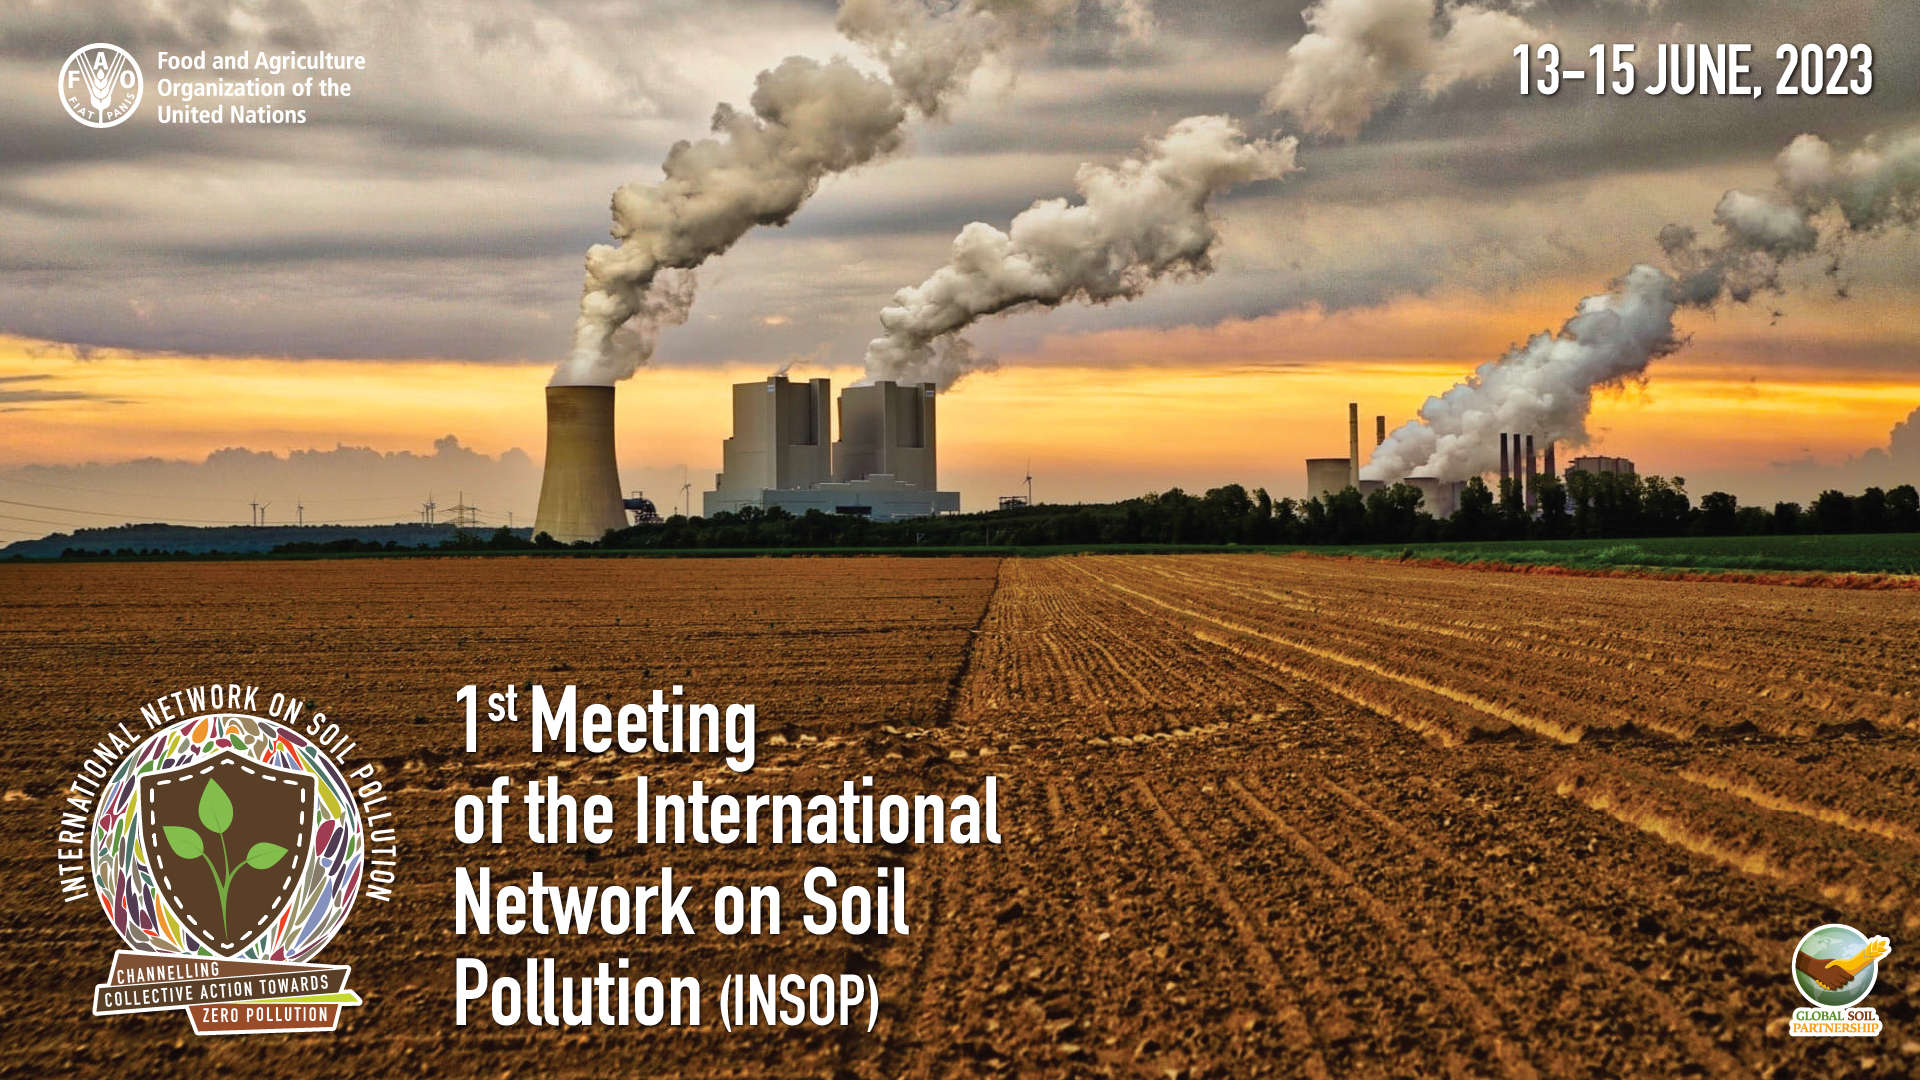 First meeting of the International Network on Soil Pollution (INSOP)